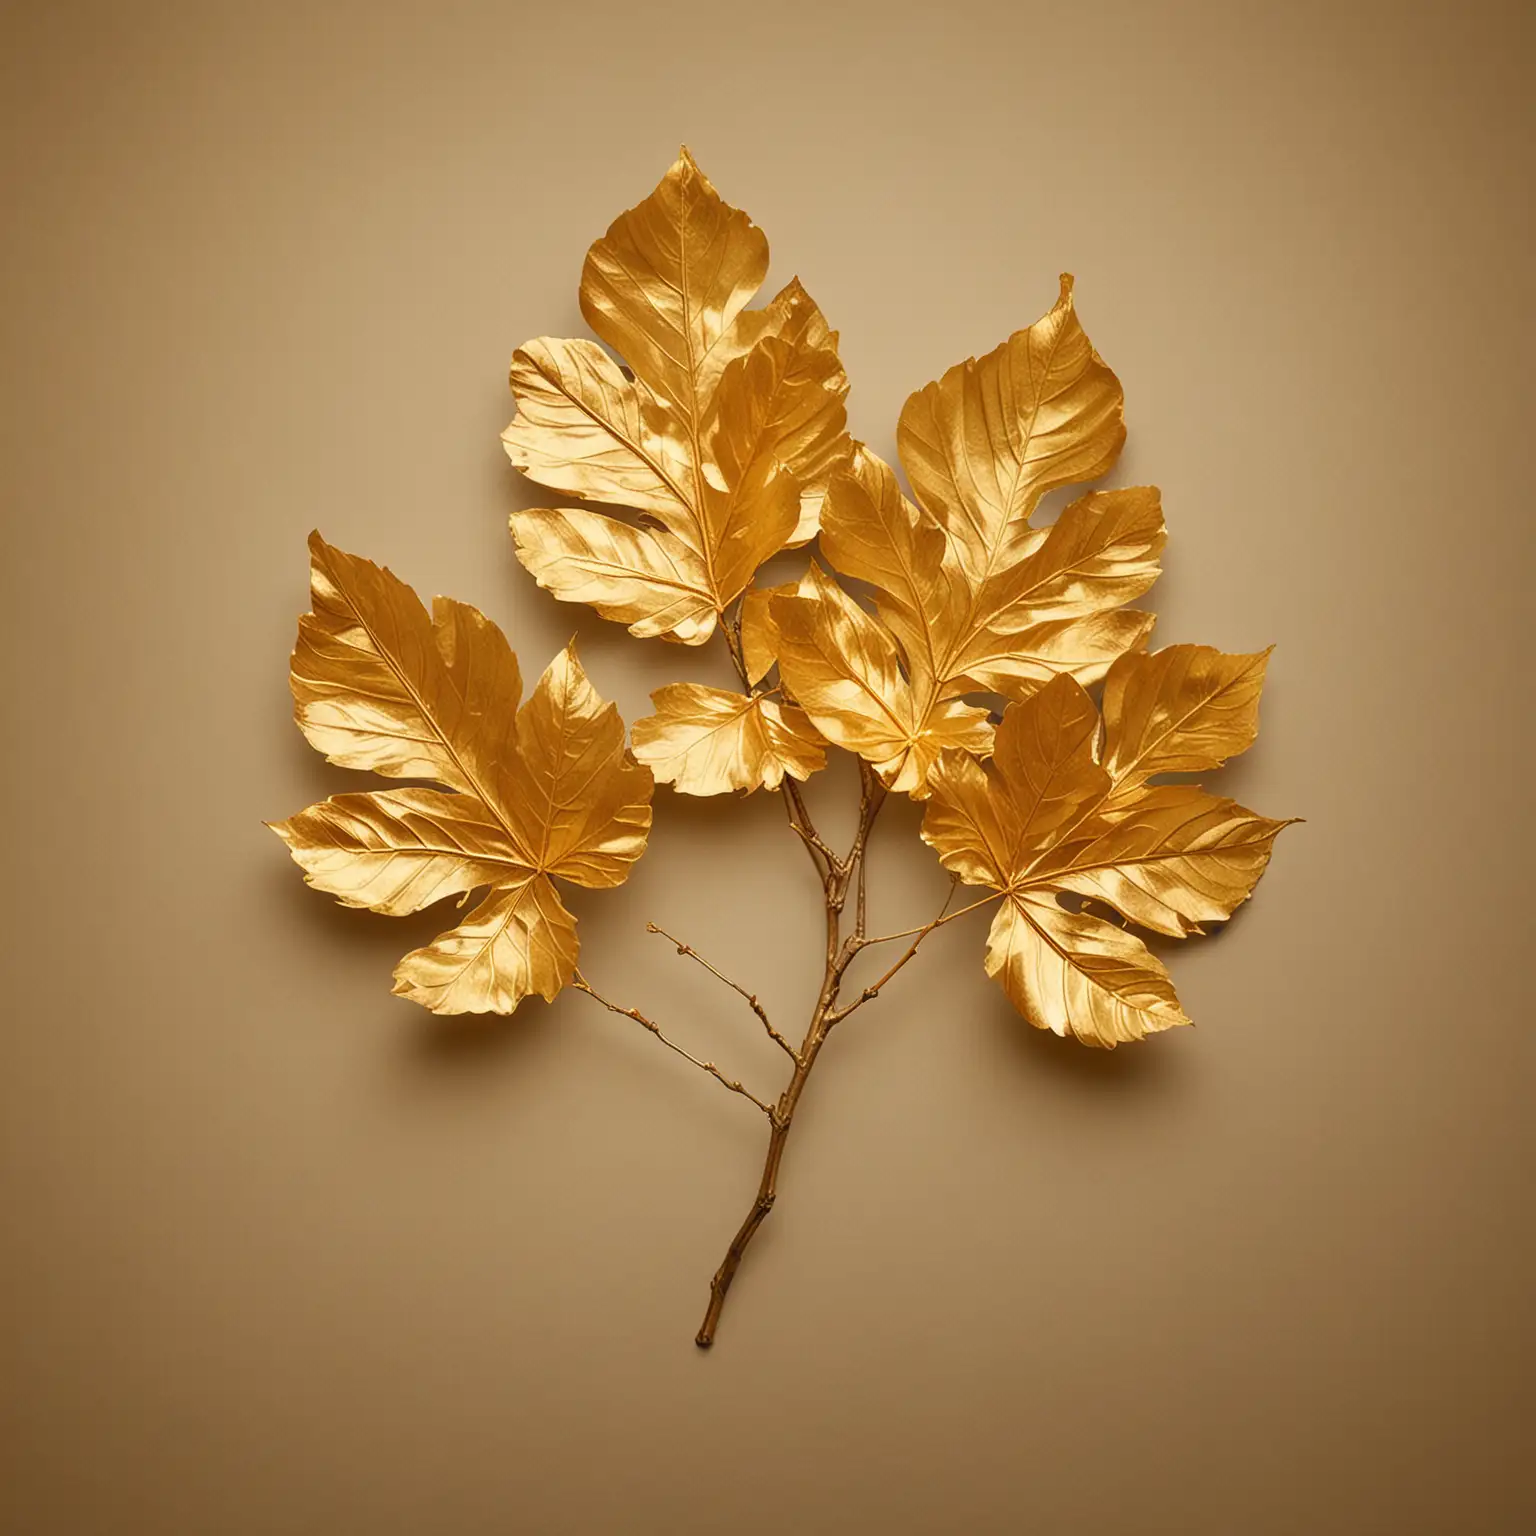 Large Gold Leaves on Branch with Elegant Gold Background